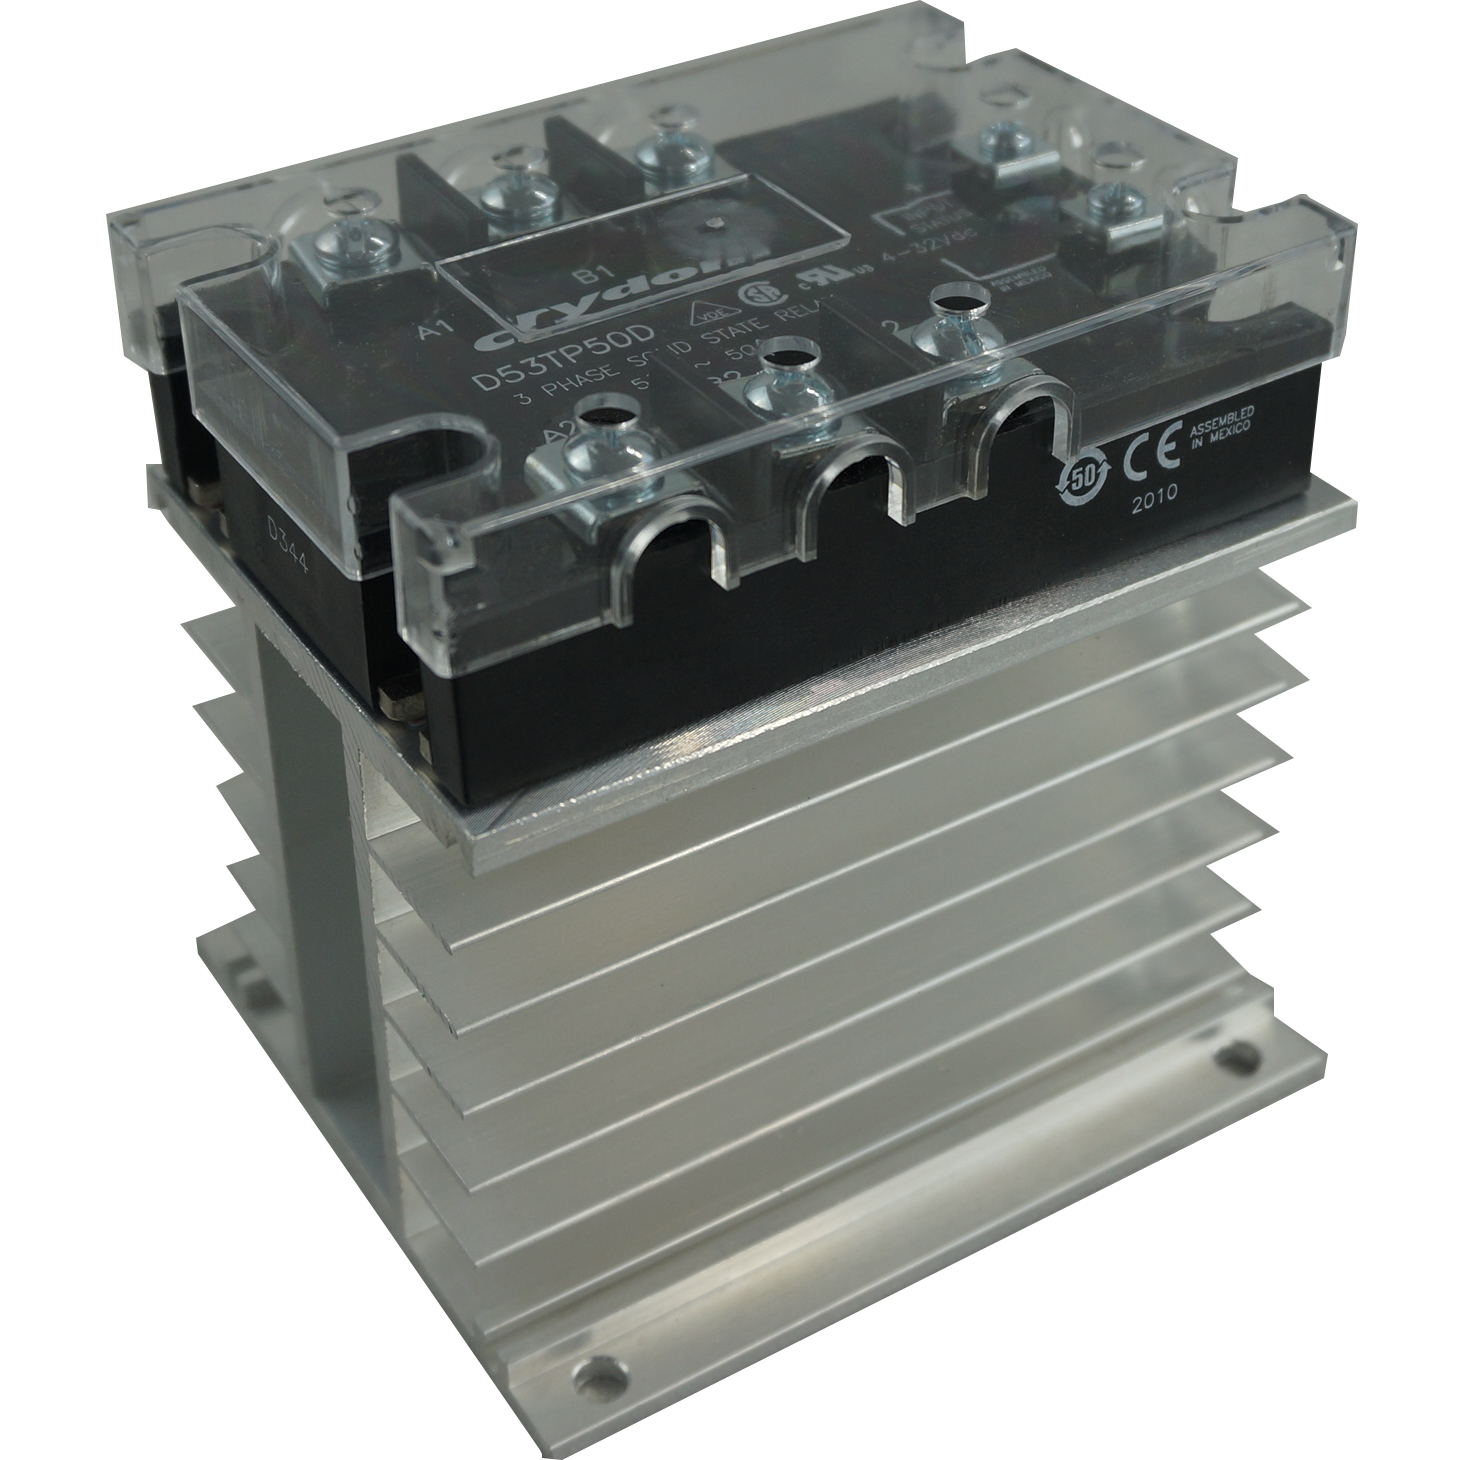 FTH6053ZD3 + HS212, Solid State Relay, and Heatsink Assembly, 3 Phase  3-32VDC Control, 20 Amp per phase @ 40 Deg C, 48-530VAC Load, LED Status Indicator, with IP20 Cover